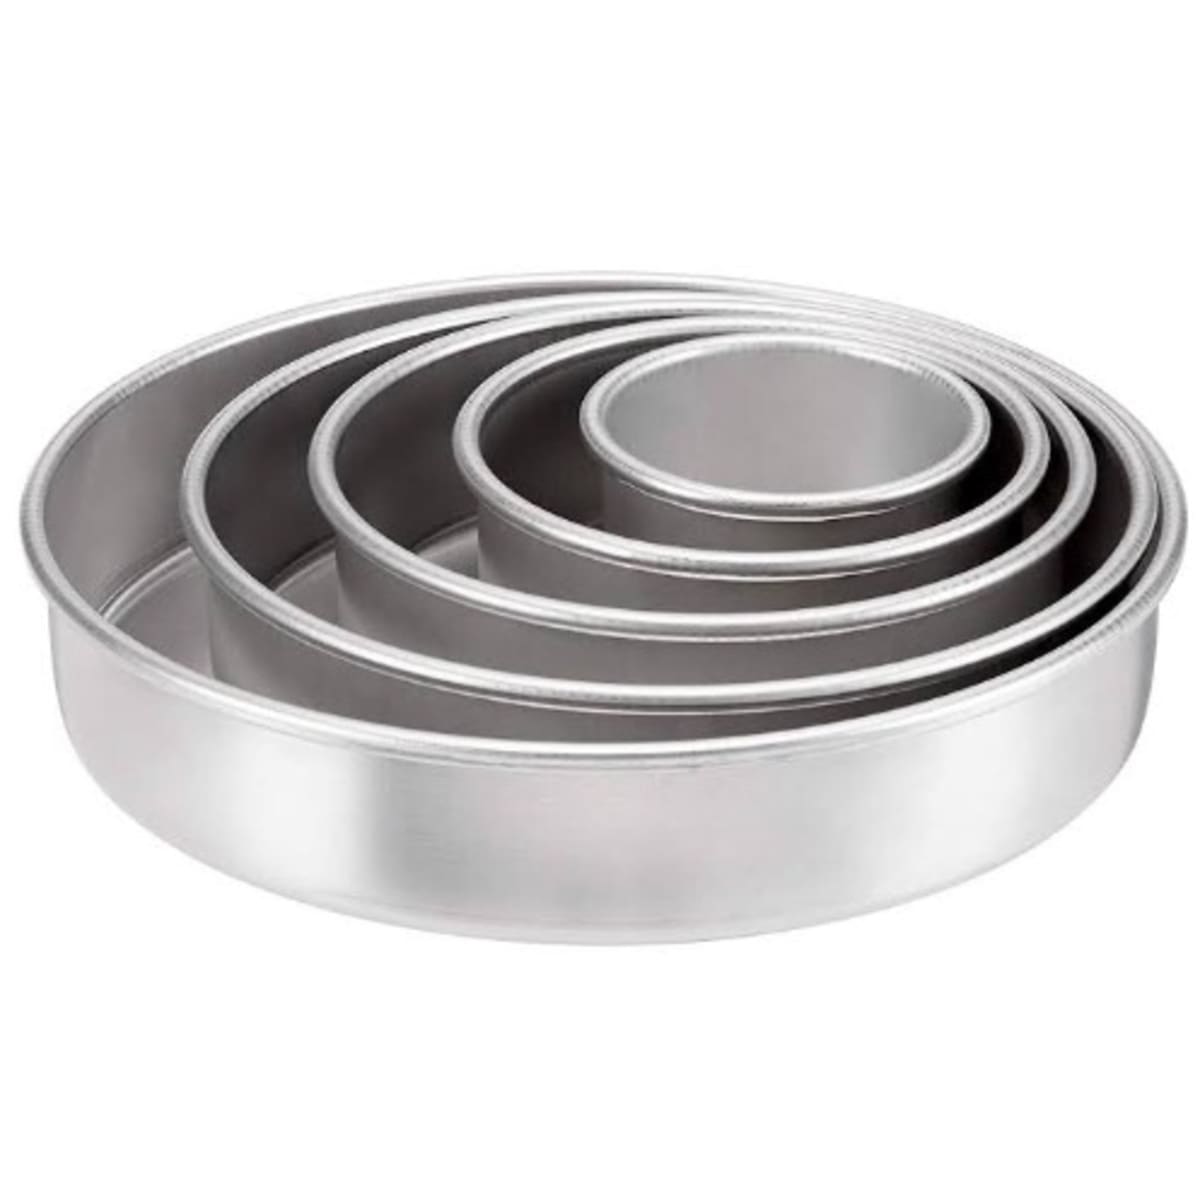 Round Cake Pan, 7 x 3-in - The Gourmet Warehouse